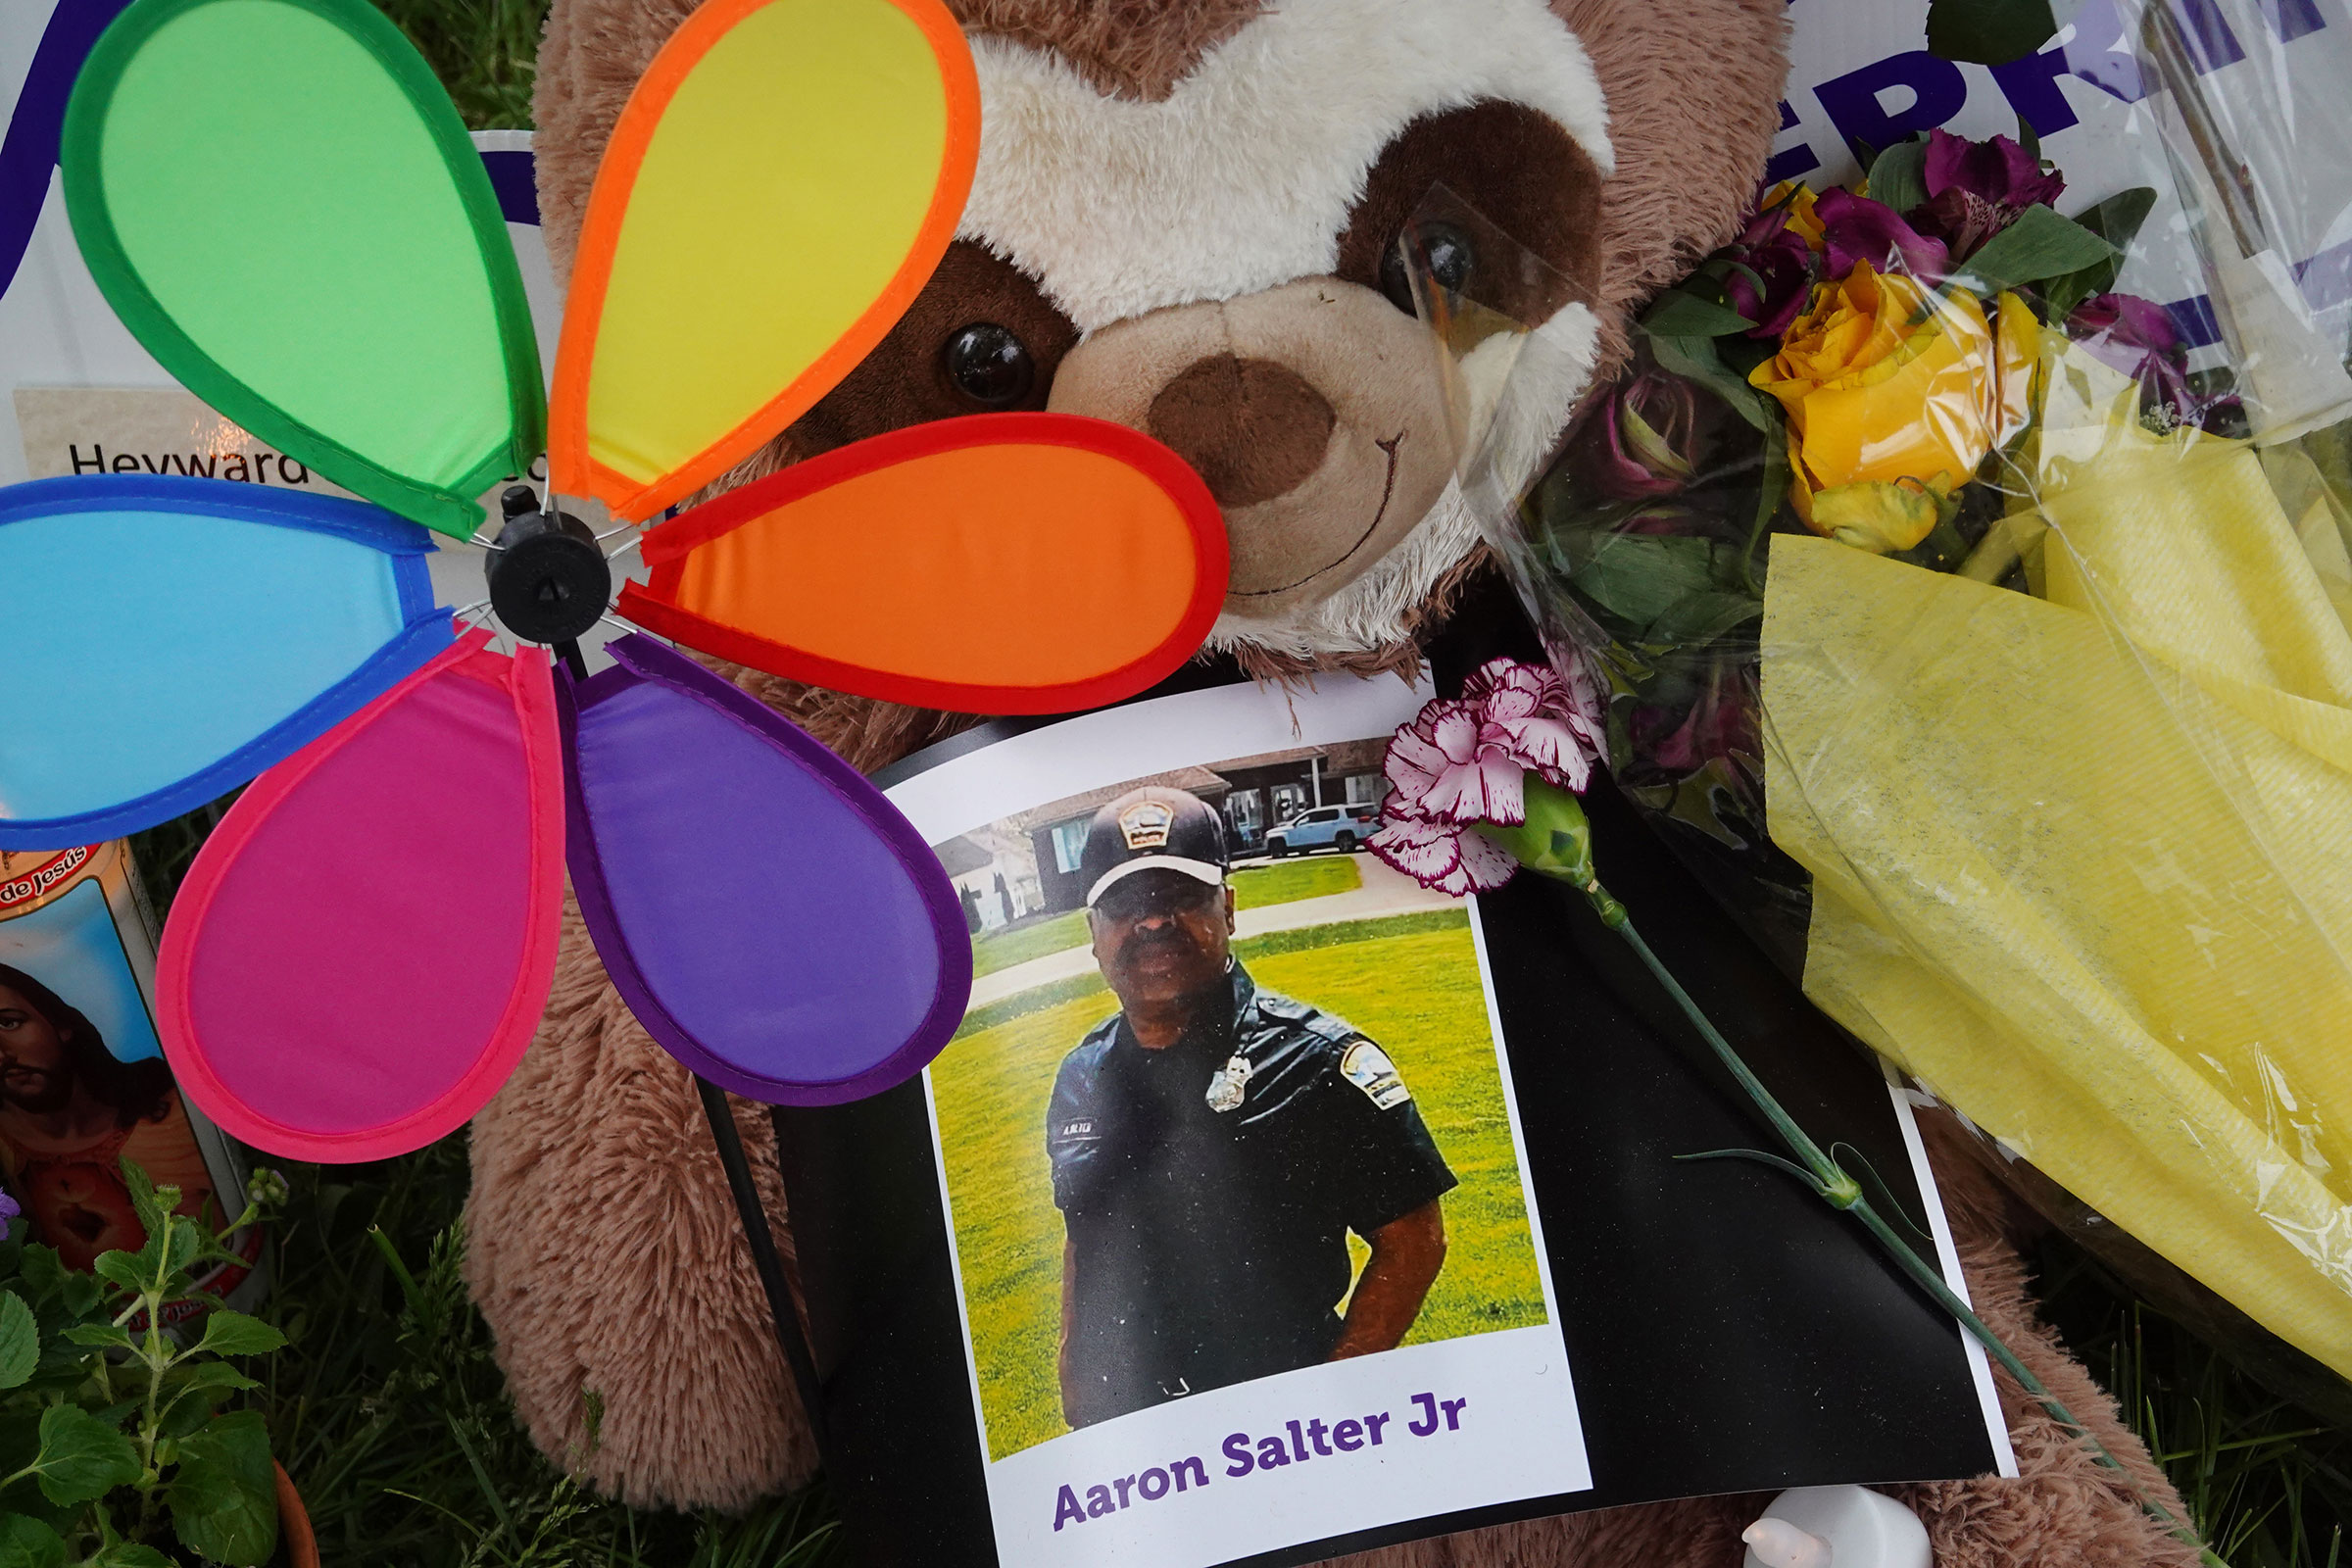 Flowers, candles and mementoes are left in honor of Aaron Salter Jr., the security guard who was shot and killed trying to stop a gunman at the Tops supermarket, at a makeshift memorial outside the store in Buffalo on May 18, 2022.